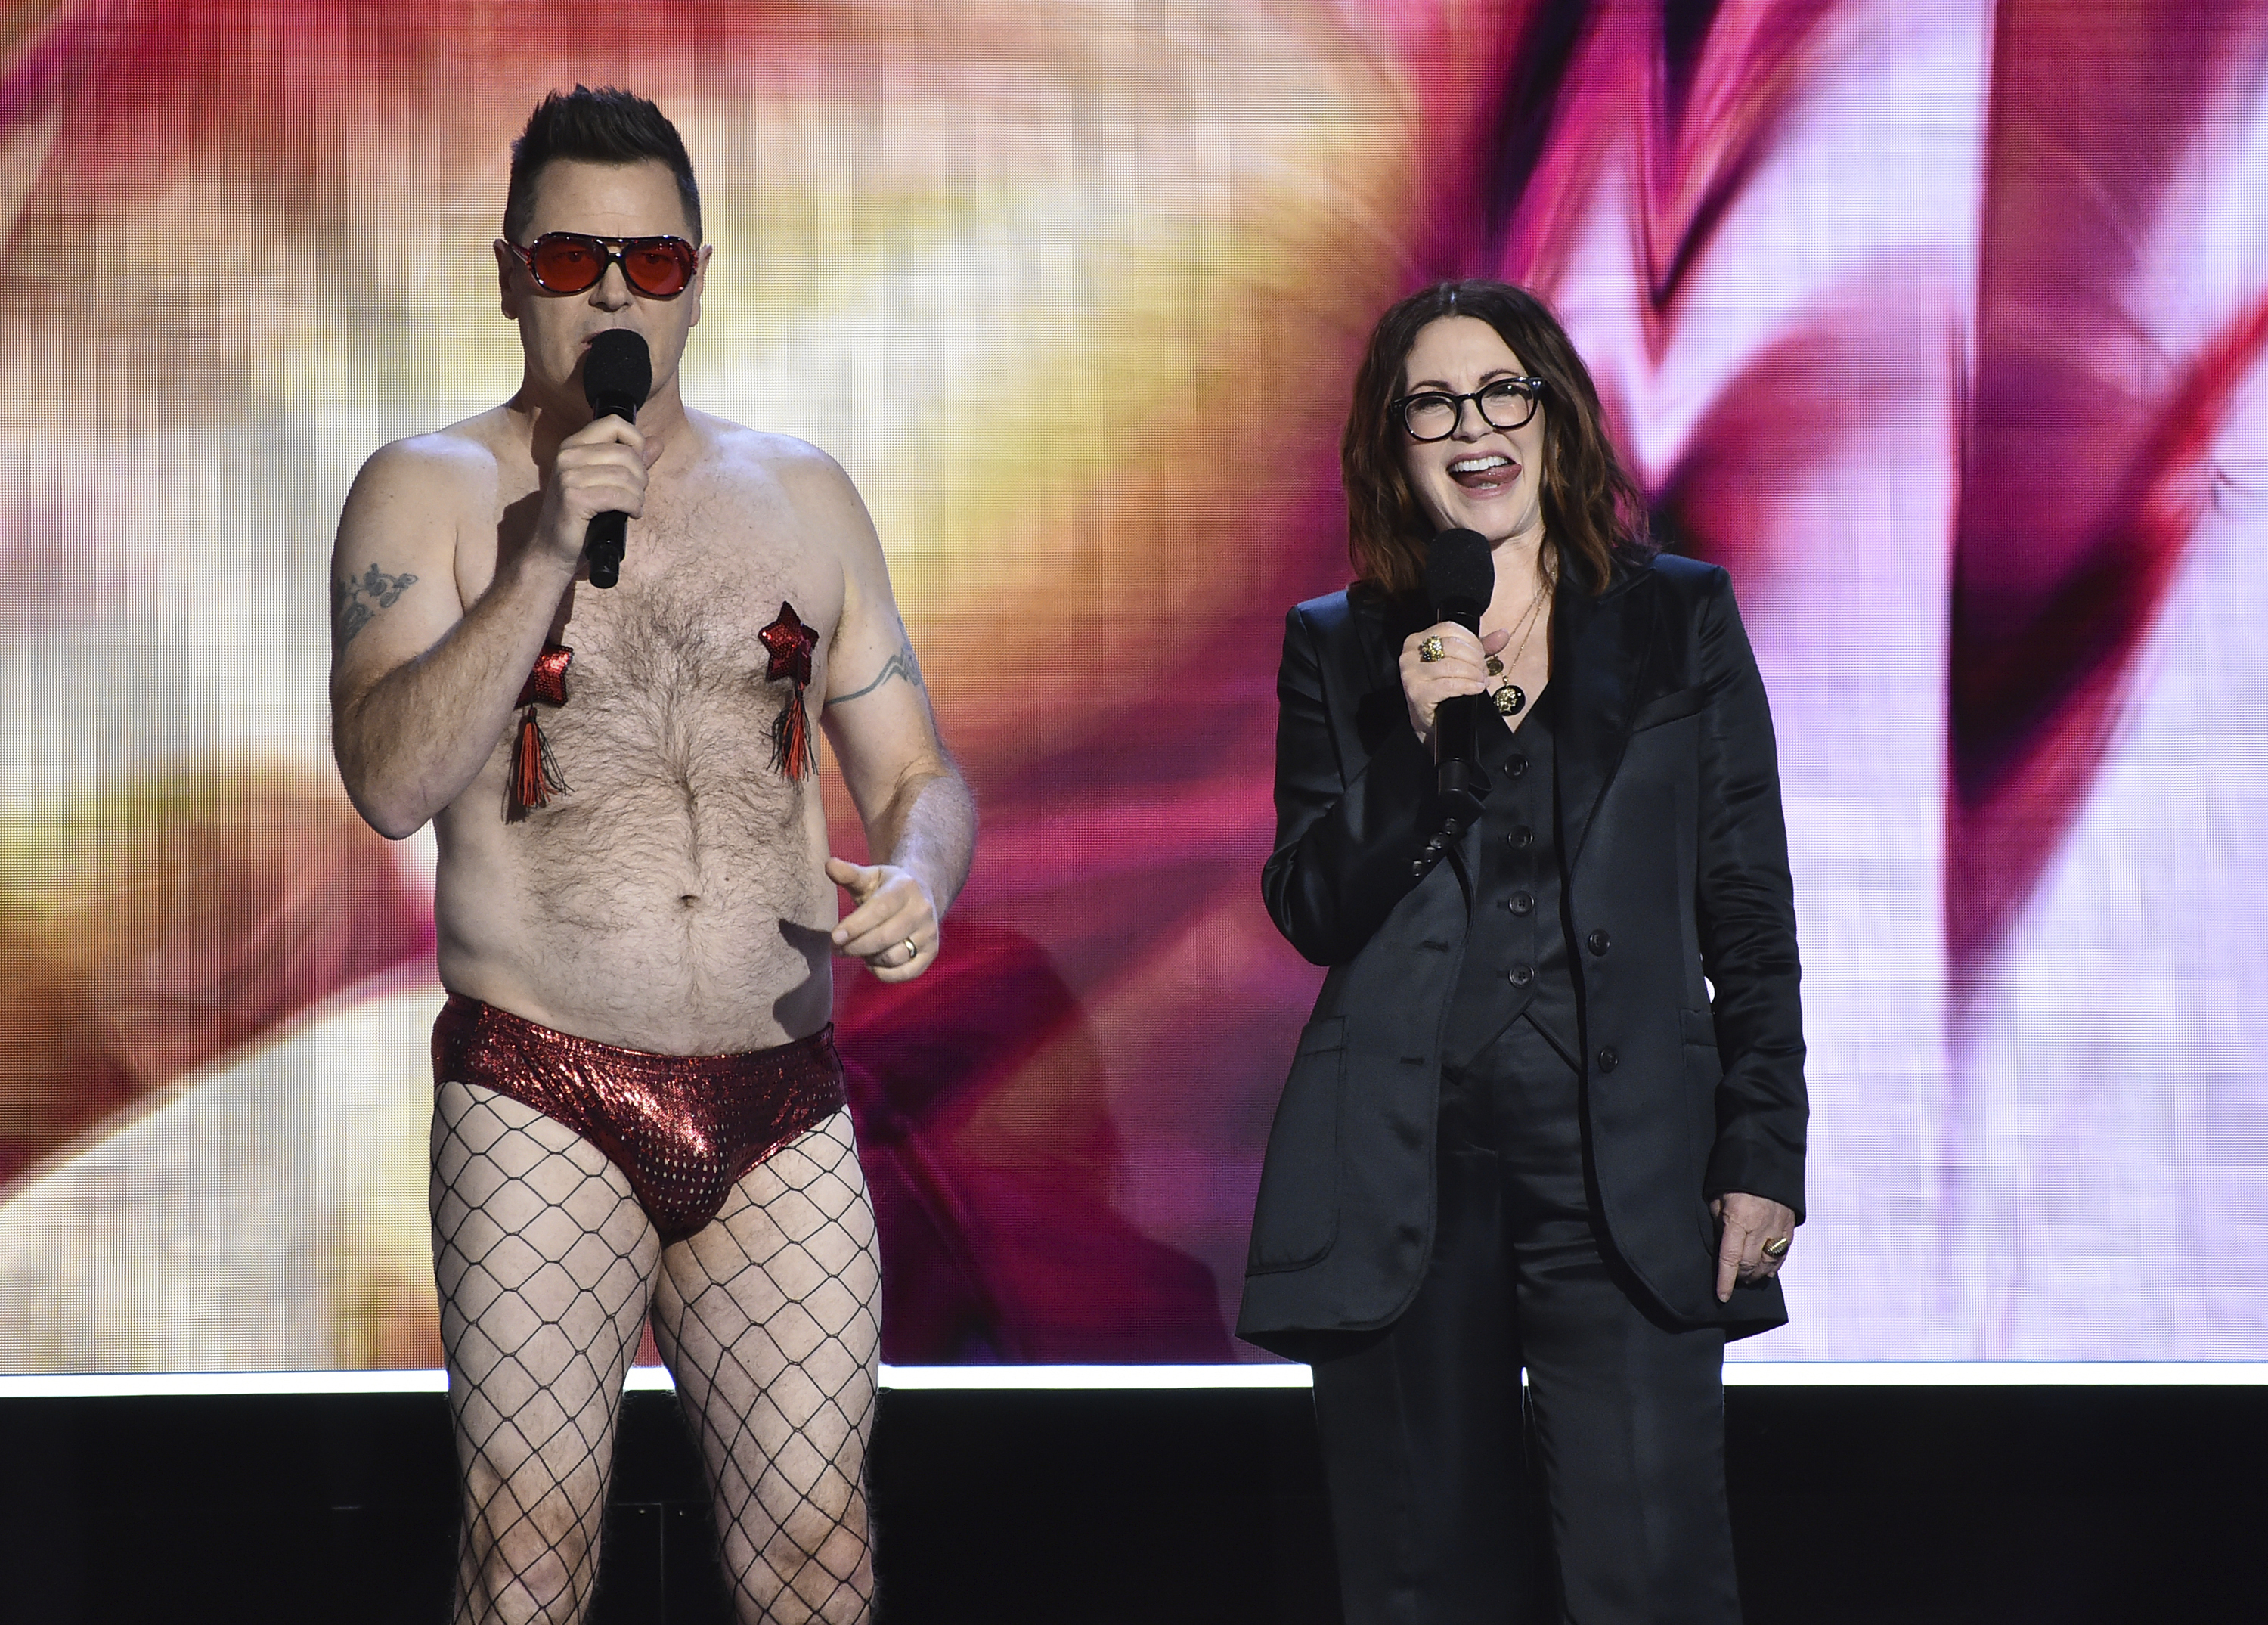 Hosts Nick Offerman and Megan Mullally speak at the 37th Film Independent Spirit Awards